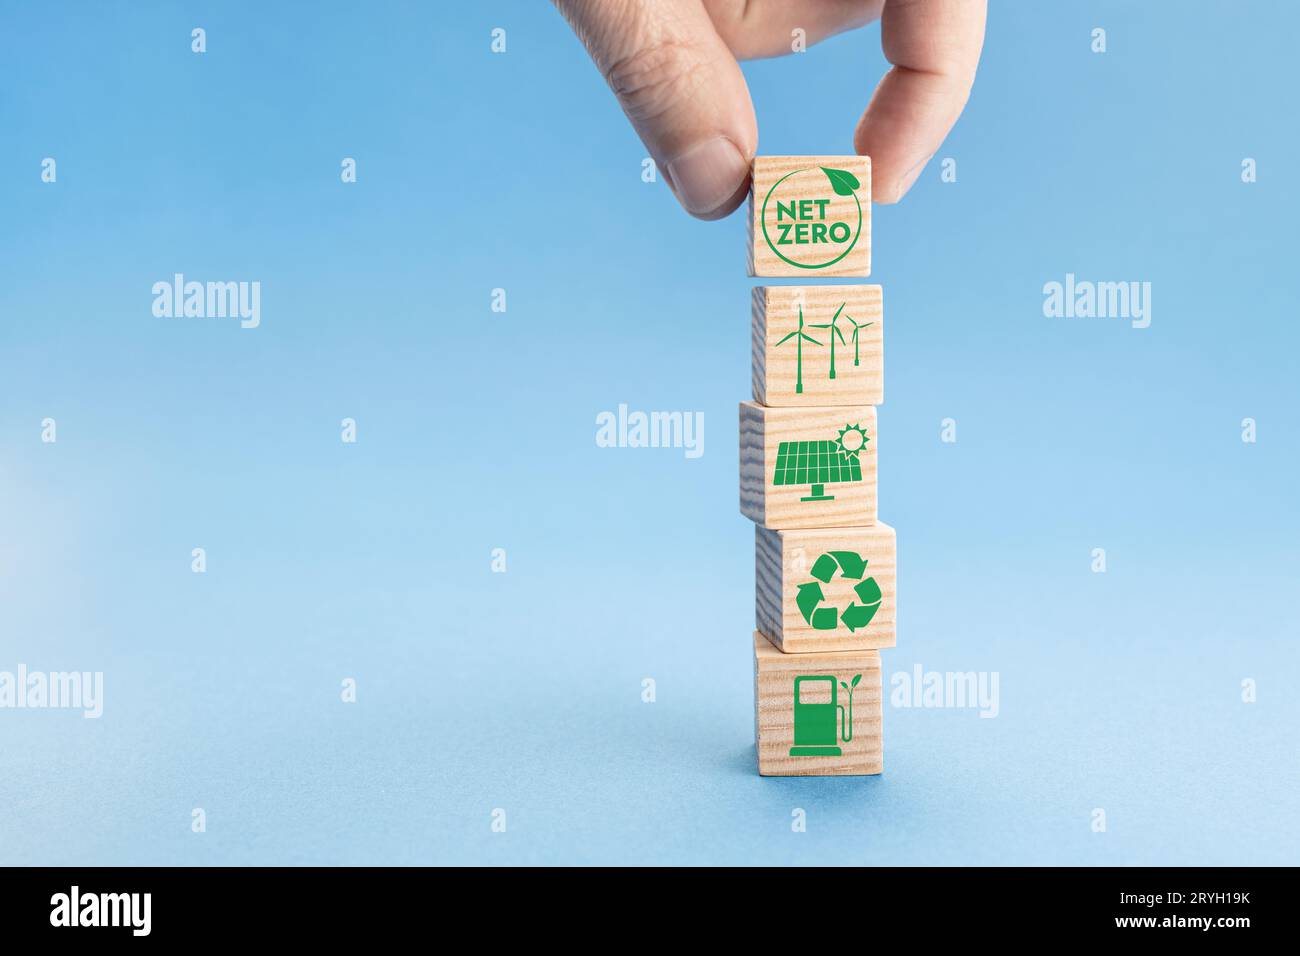 Net Zero and Carbon Neutral Concept. Hand putting wood block with Net Zero icon on top of others with green energy icons. Blue b Stock Photo